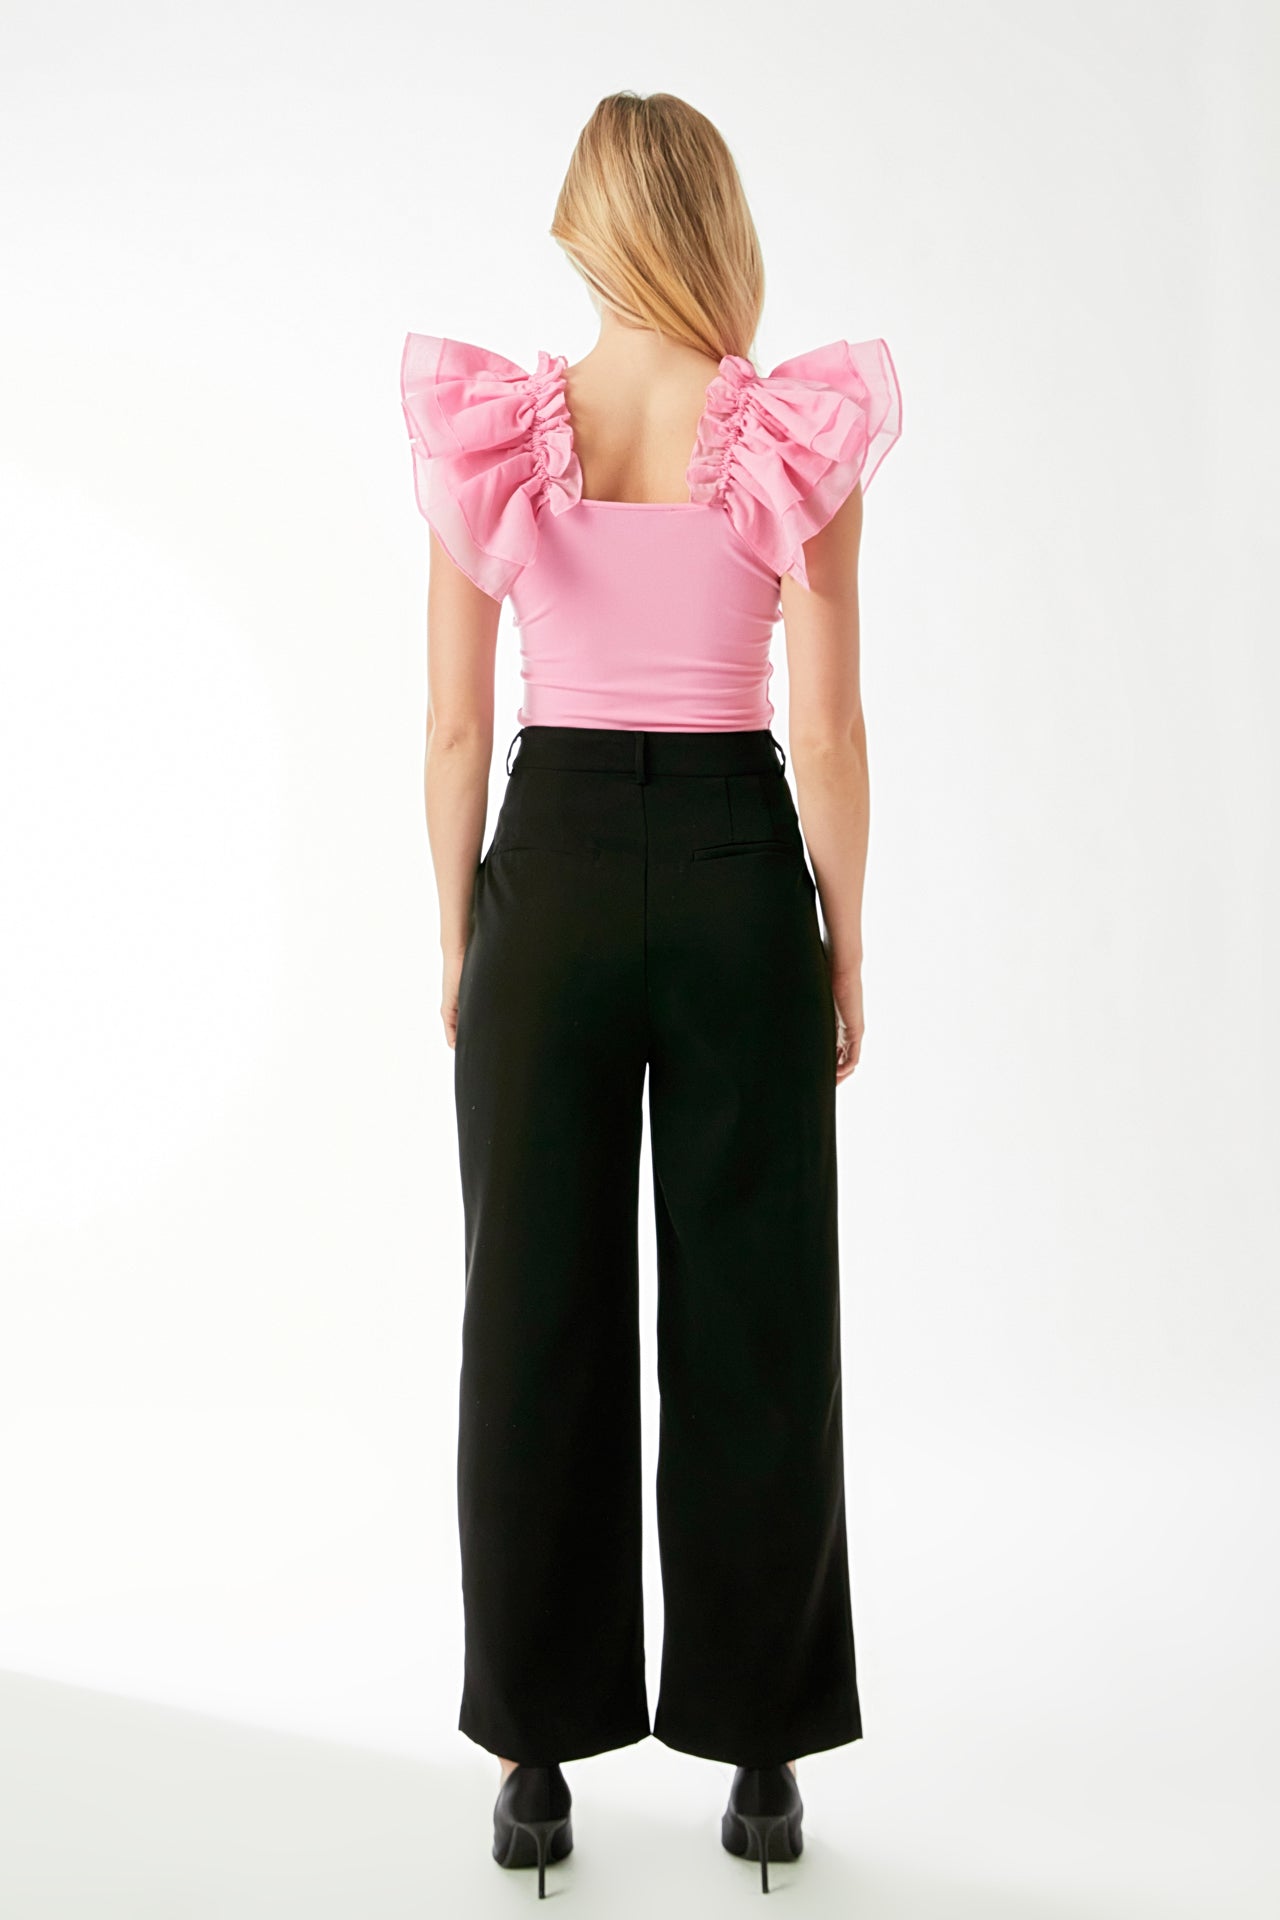 ENDLESS ROSE - Organza Ruffle with Knit Top - TOPS available at Objectrare